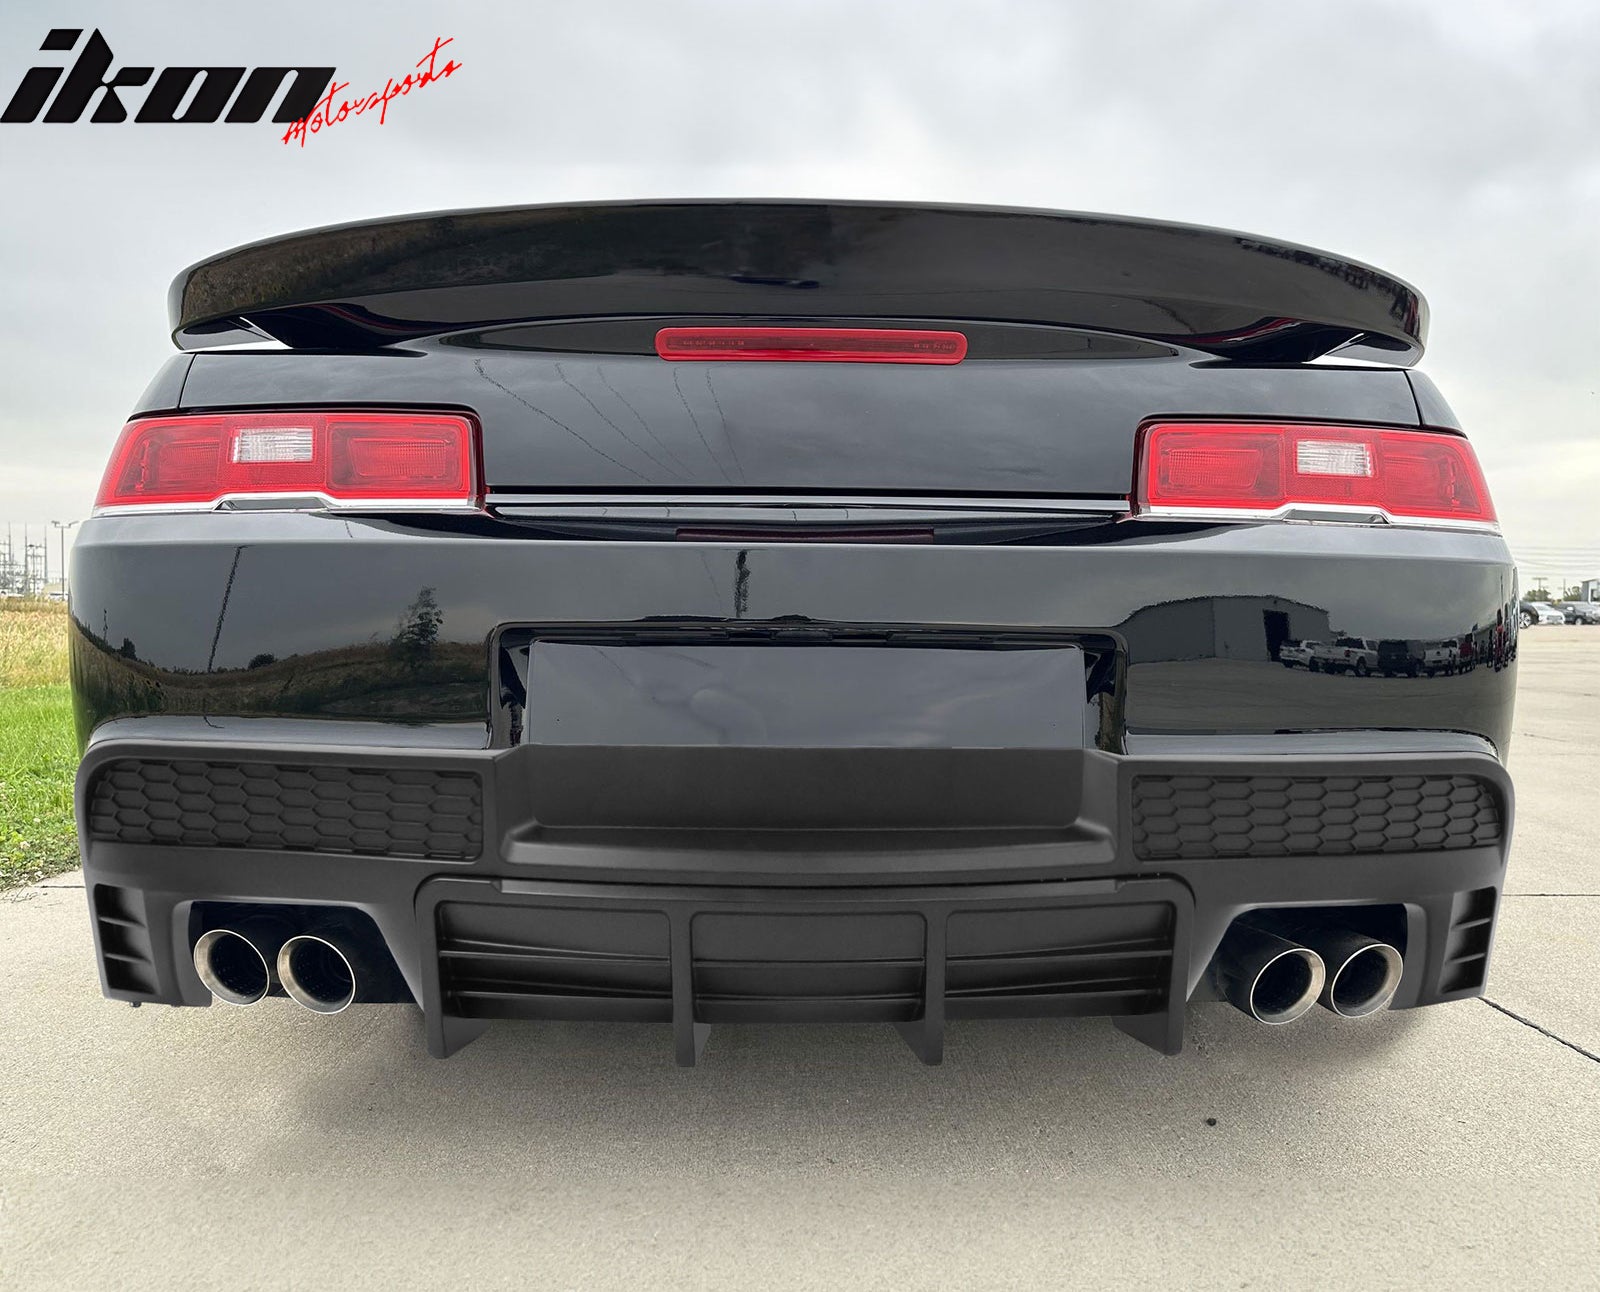 IKON MOTORSPORTS, Rear Diffuser + Stainless Steel Quad Exhaust Tips Compatible With 2014-2015 Chevrolet Camaro LT / LS Models